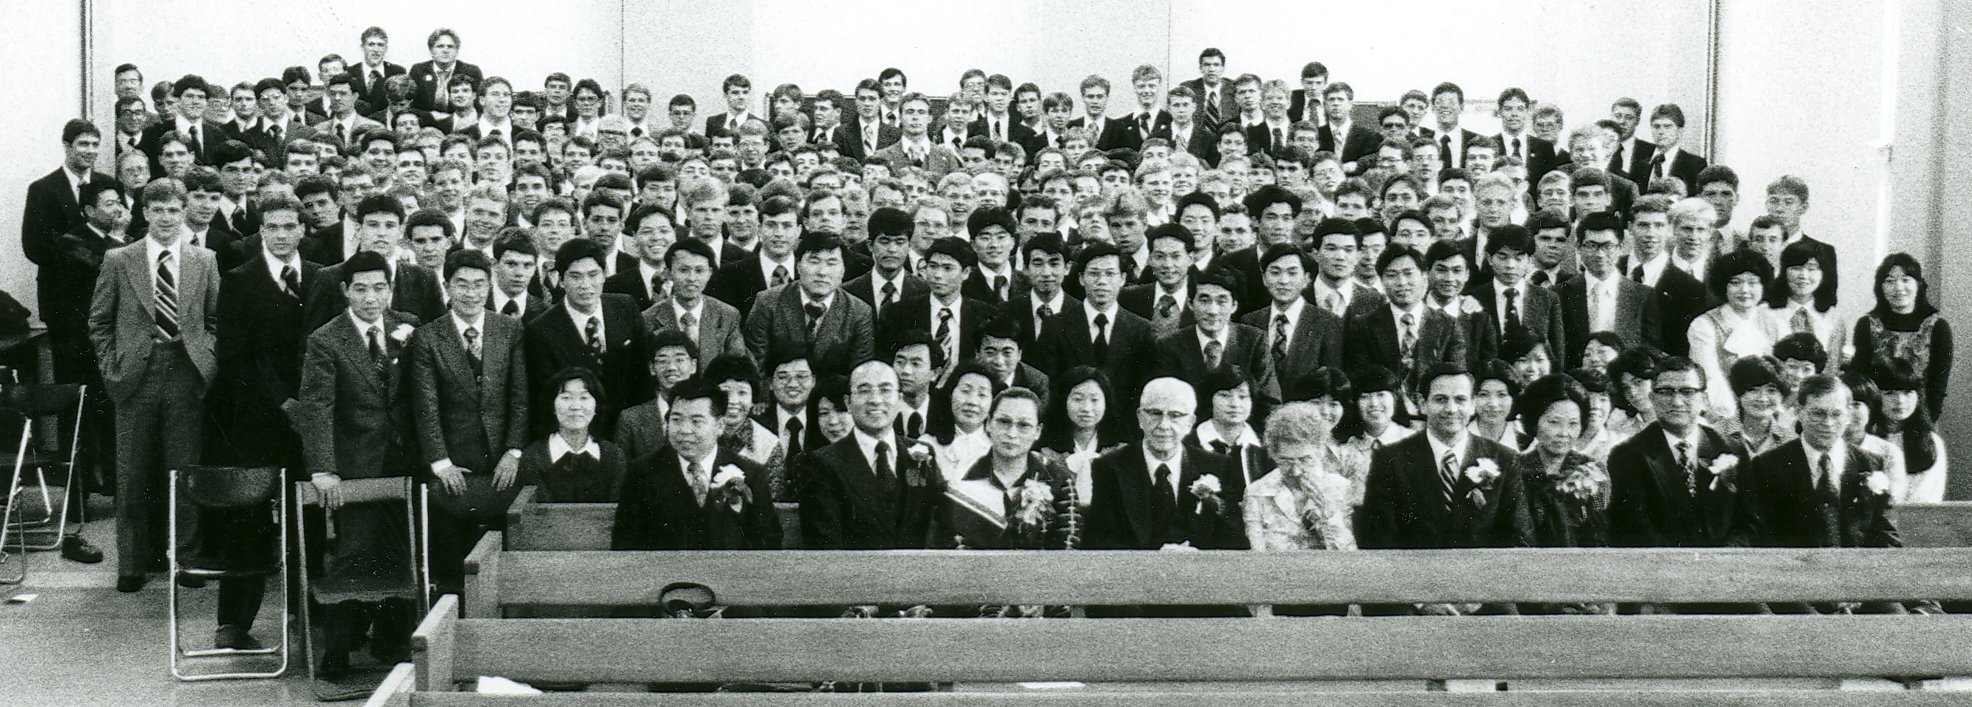 Mission Conference, May 11, 1978